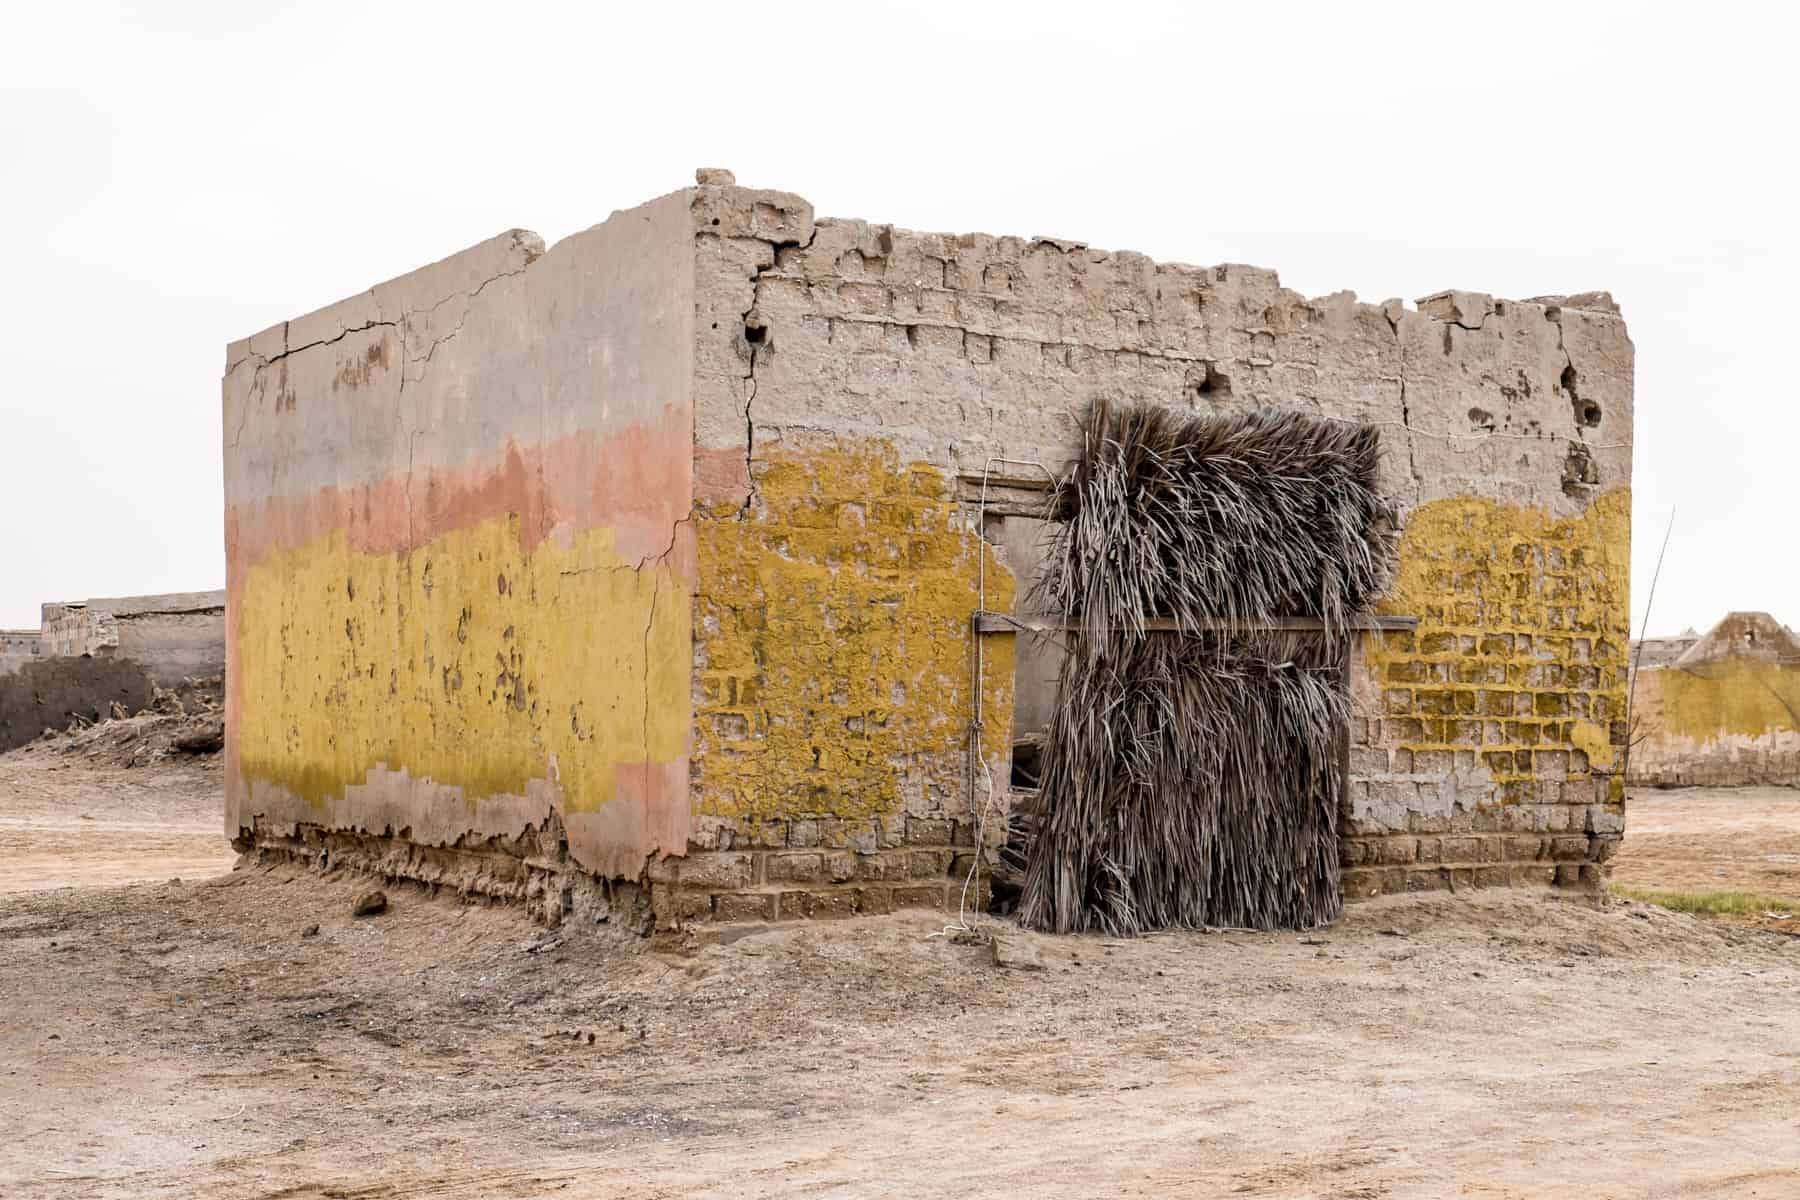 A low rectangular building with no roof, whose bottom half is painted in yellow and with a reed filled doorway, stands solitary and abandoned in Ras Al Khaimah's ghost town